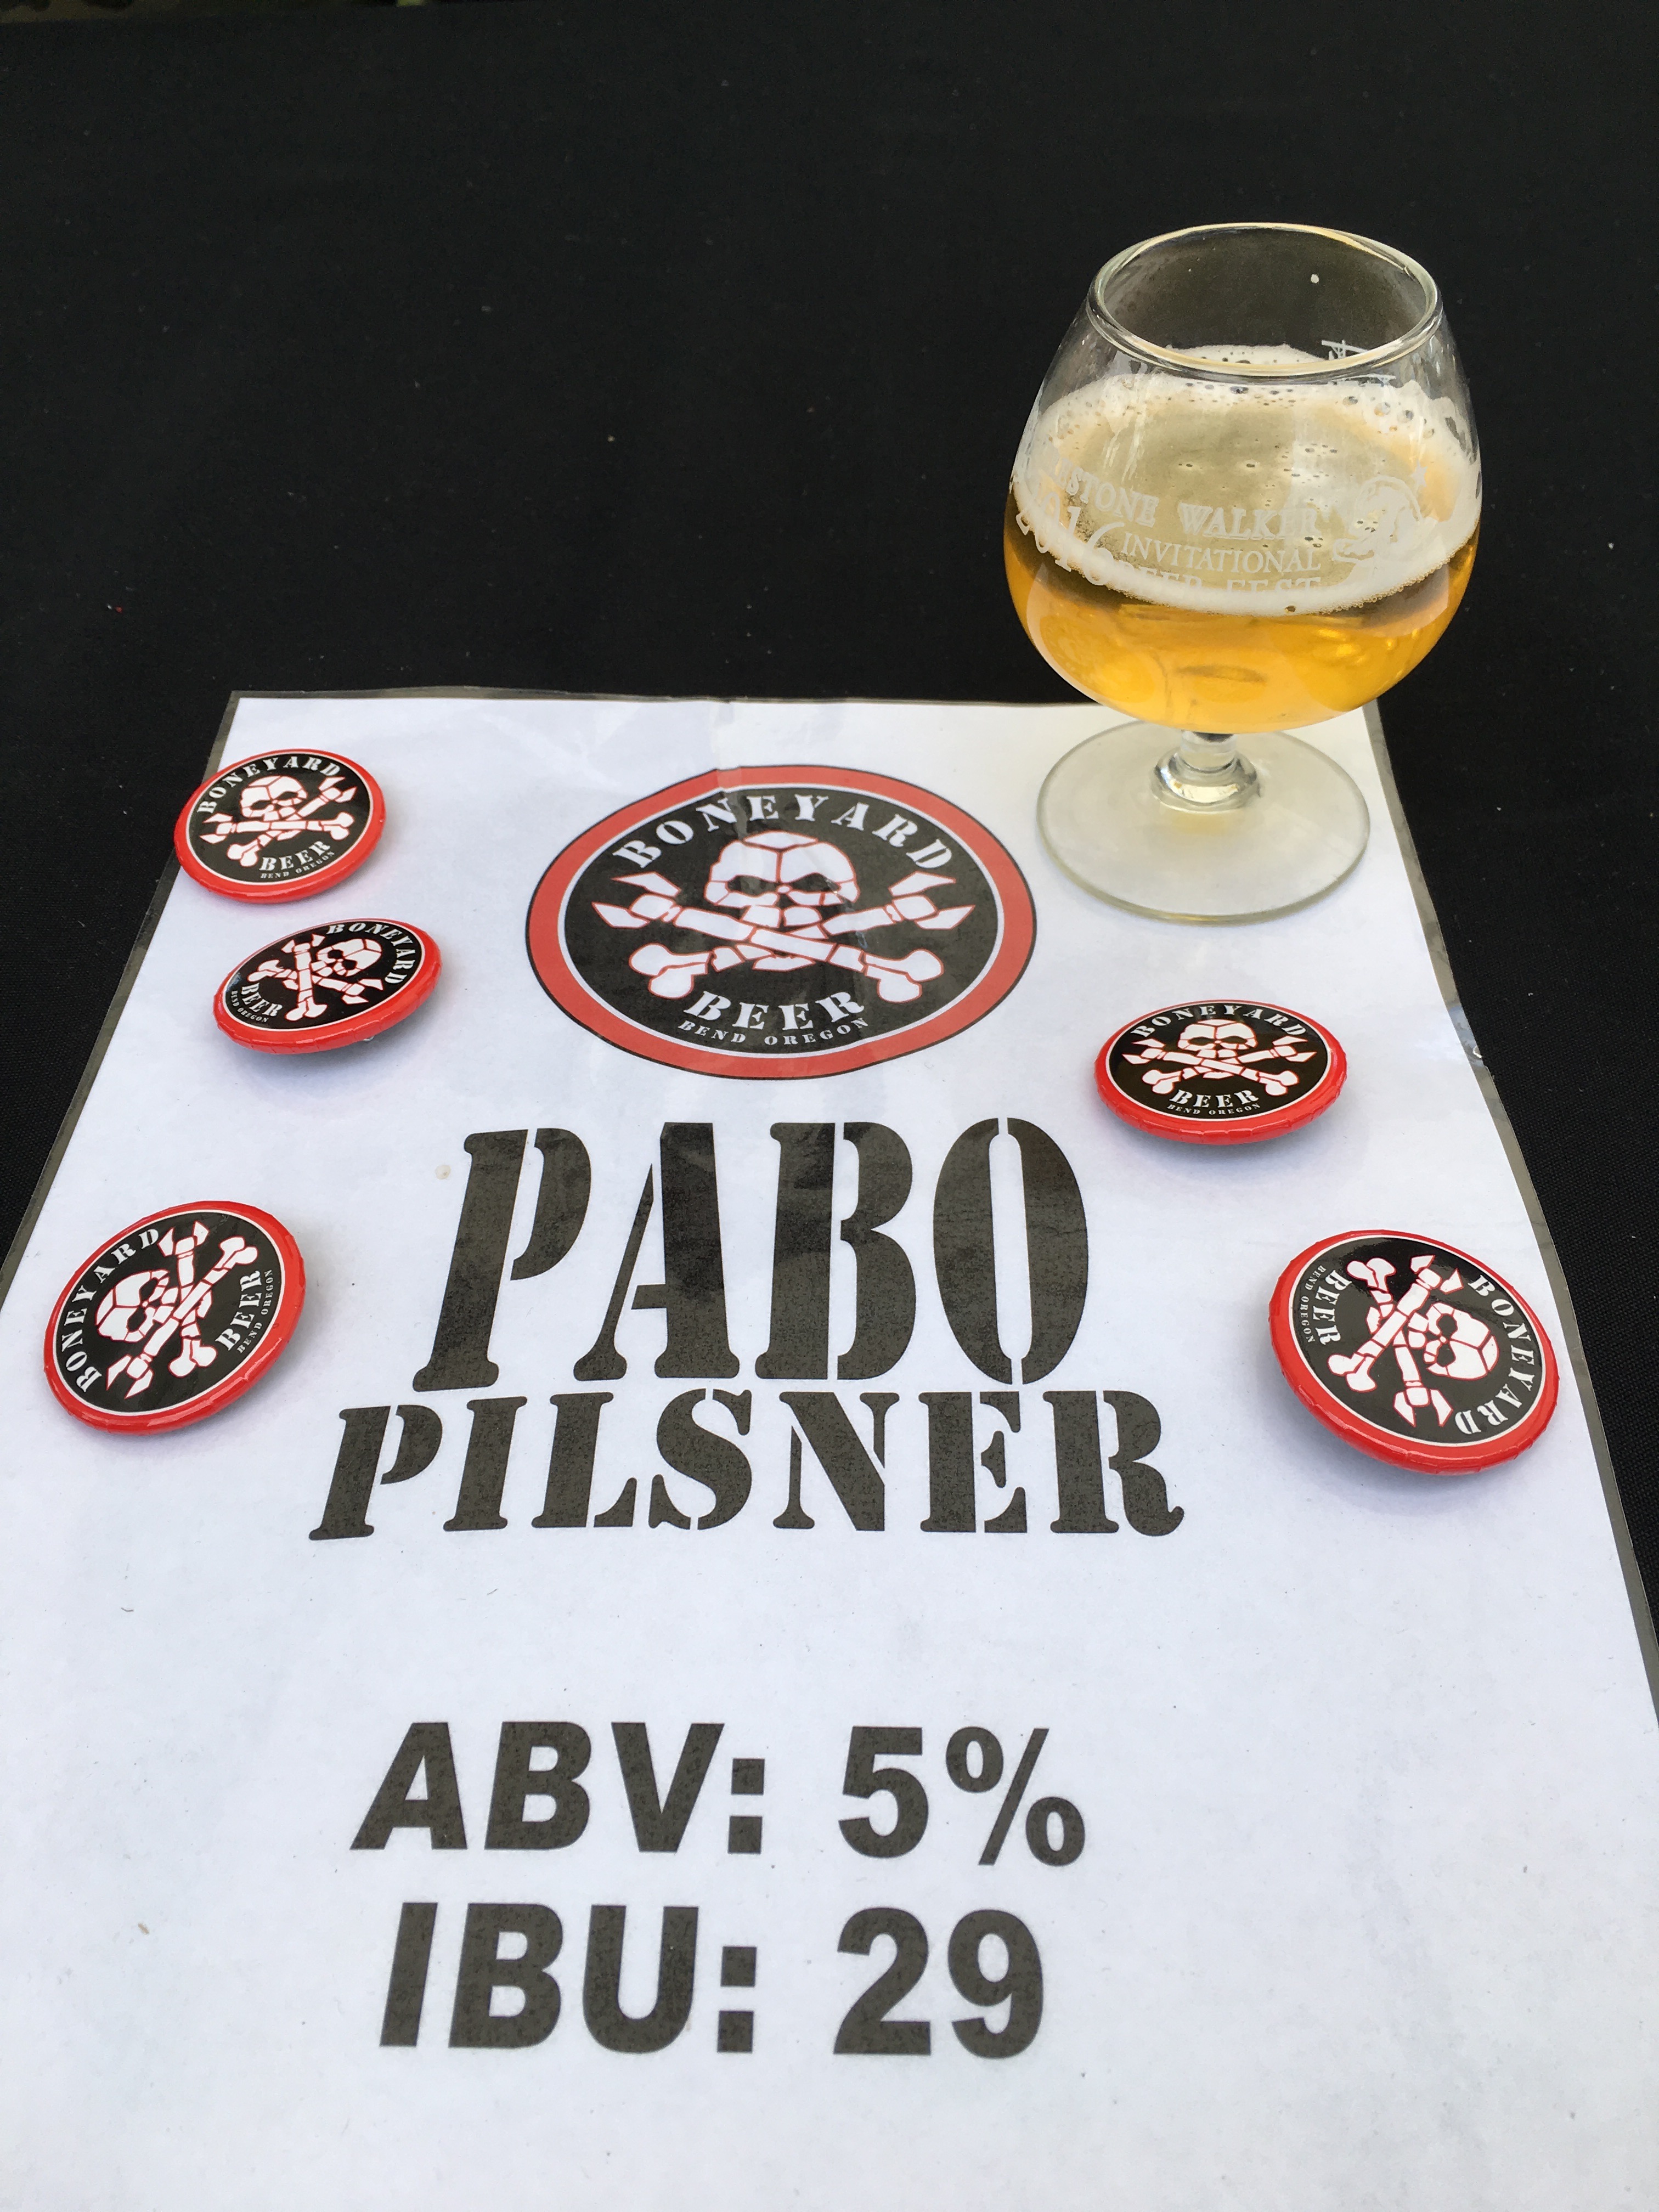 Pabo Pilsner, a new pilsner from Boneyard Beer that made its debut at the 2016 Firestone Walker Invitational Beer Fest. This beer will be pouring at Roscoe's on June 17 during the Brewery Owners Summit.